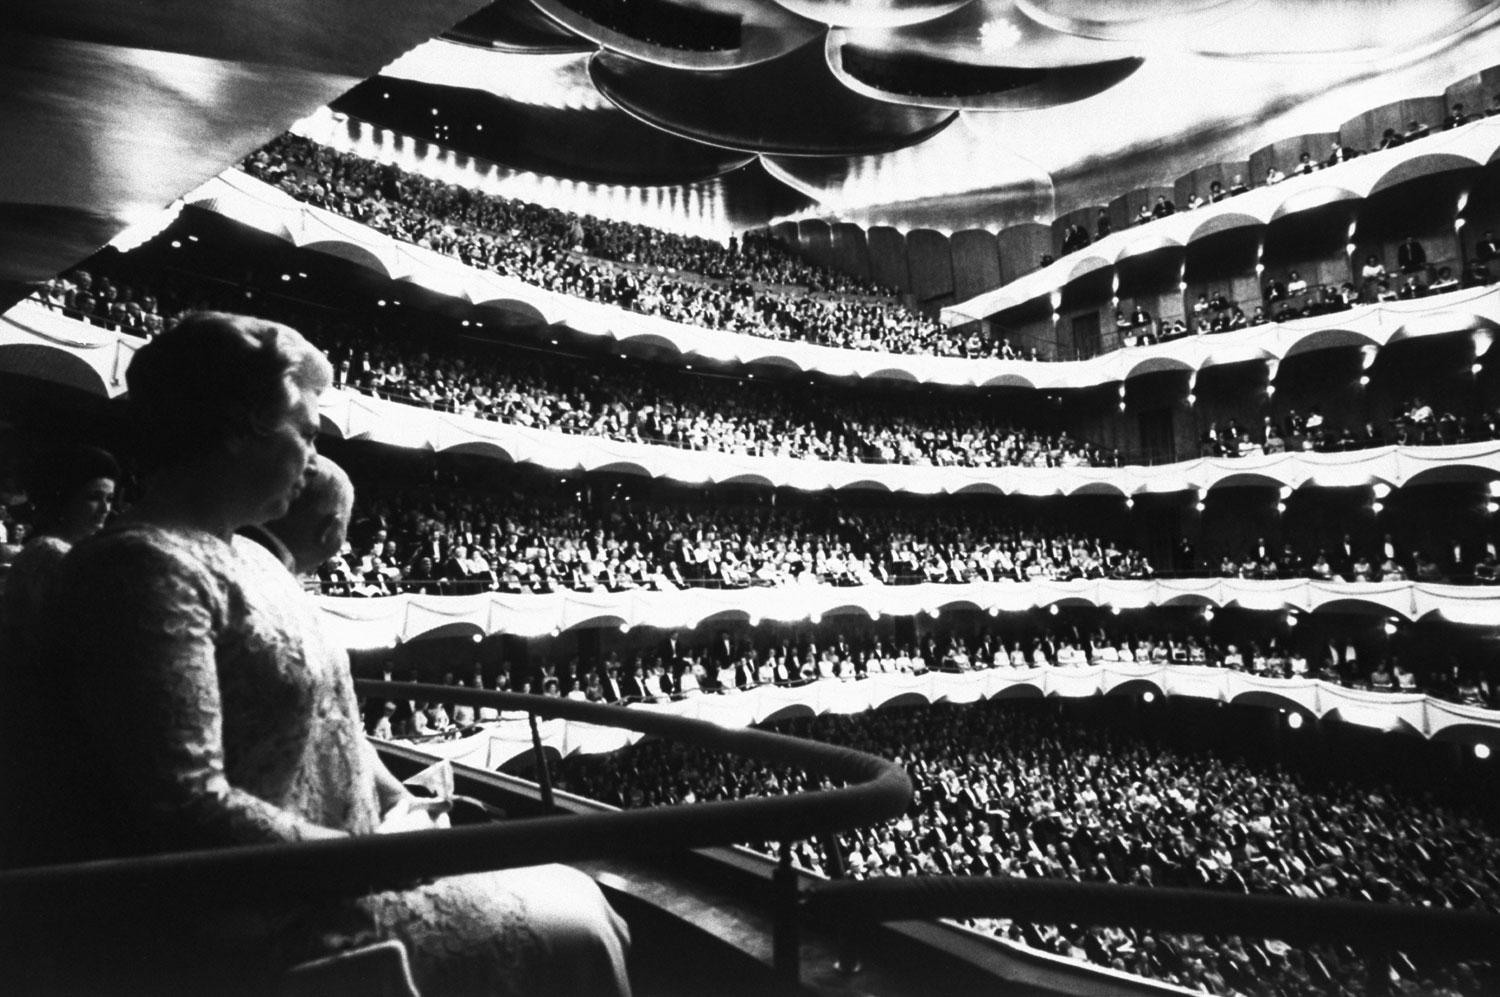 A view from the balcony at the opening of new Metropolitan Opera House at Lincoln Center in January 1966.